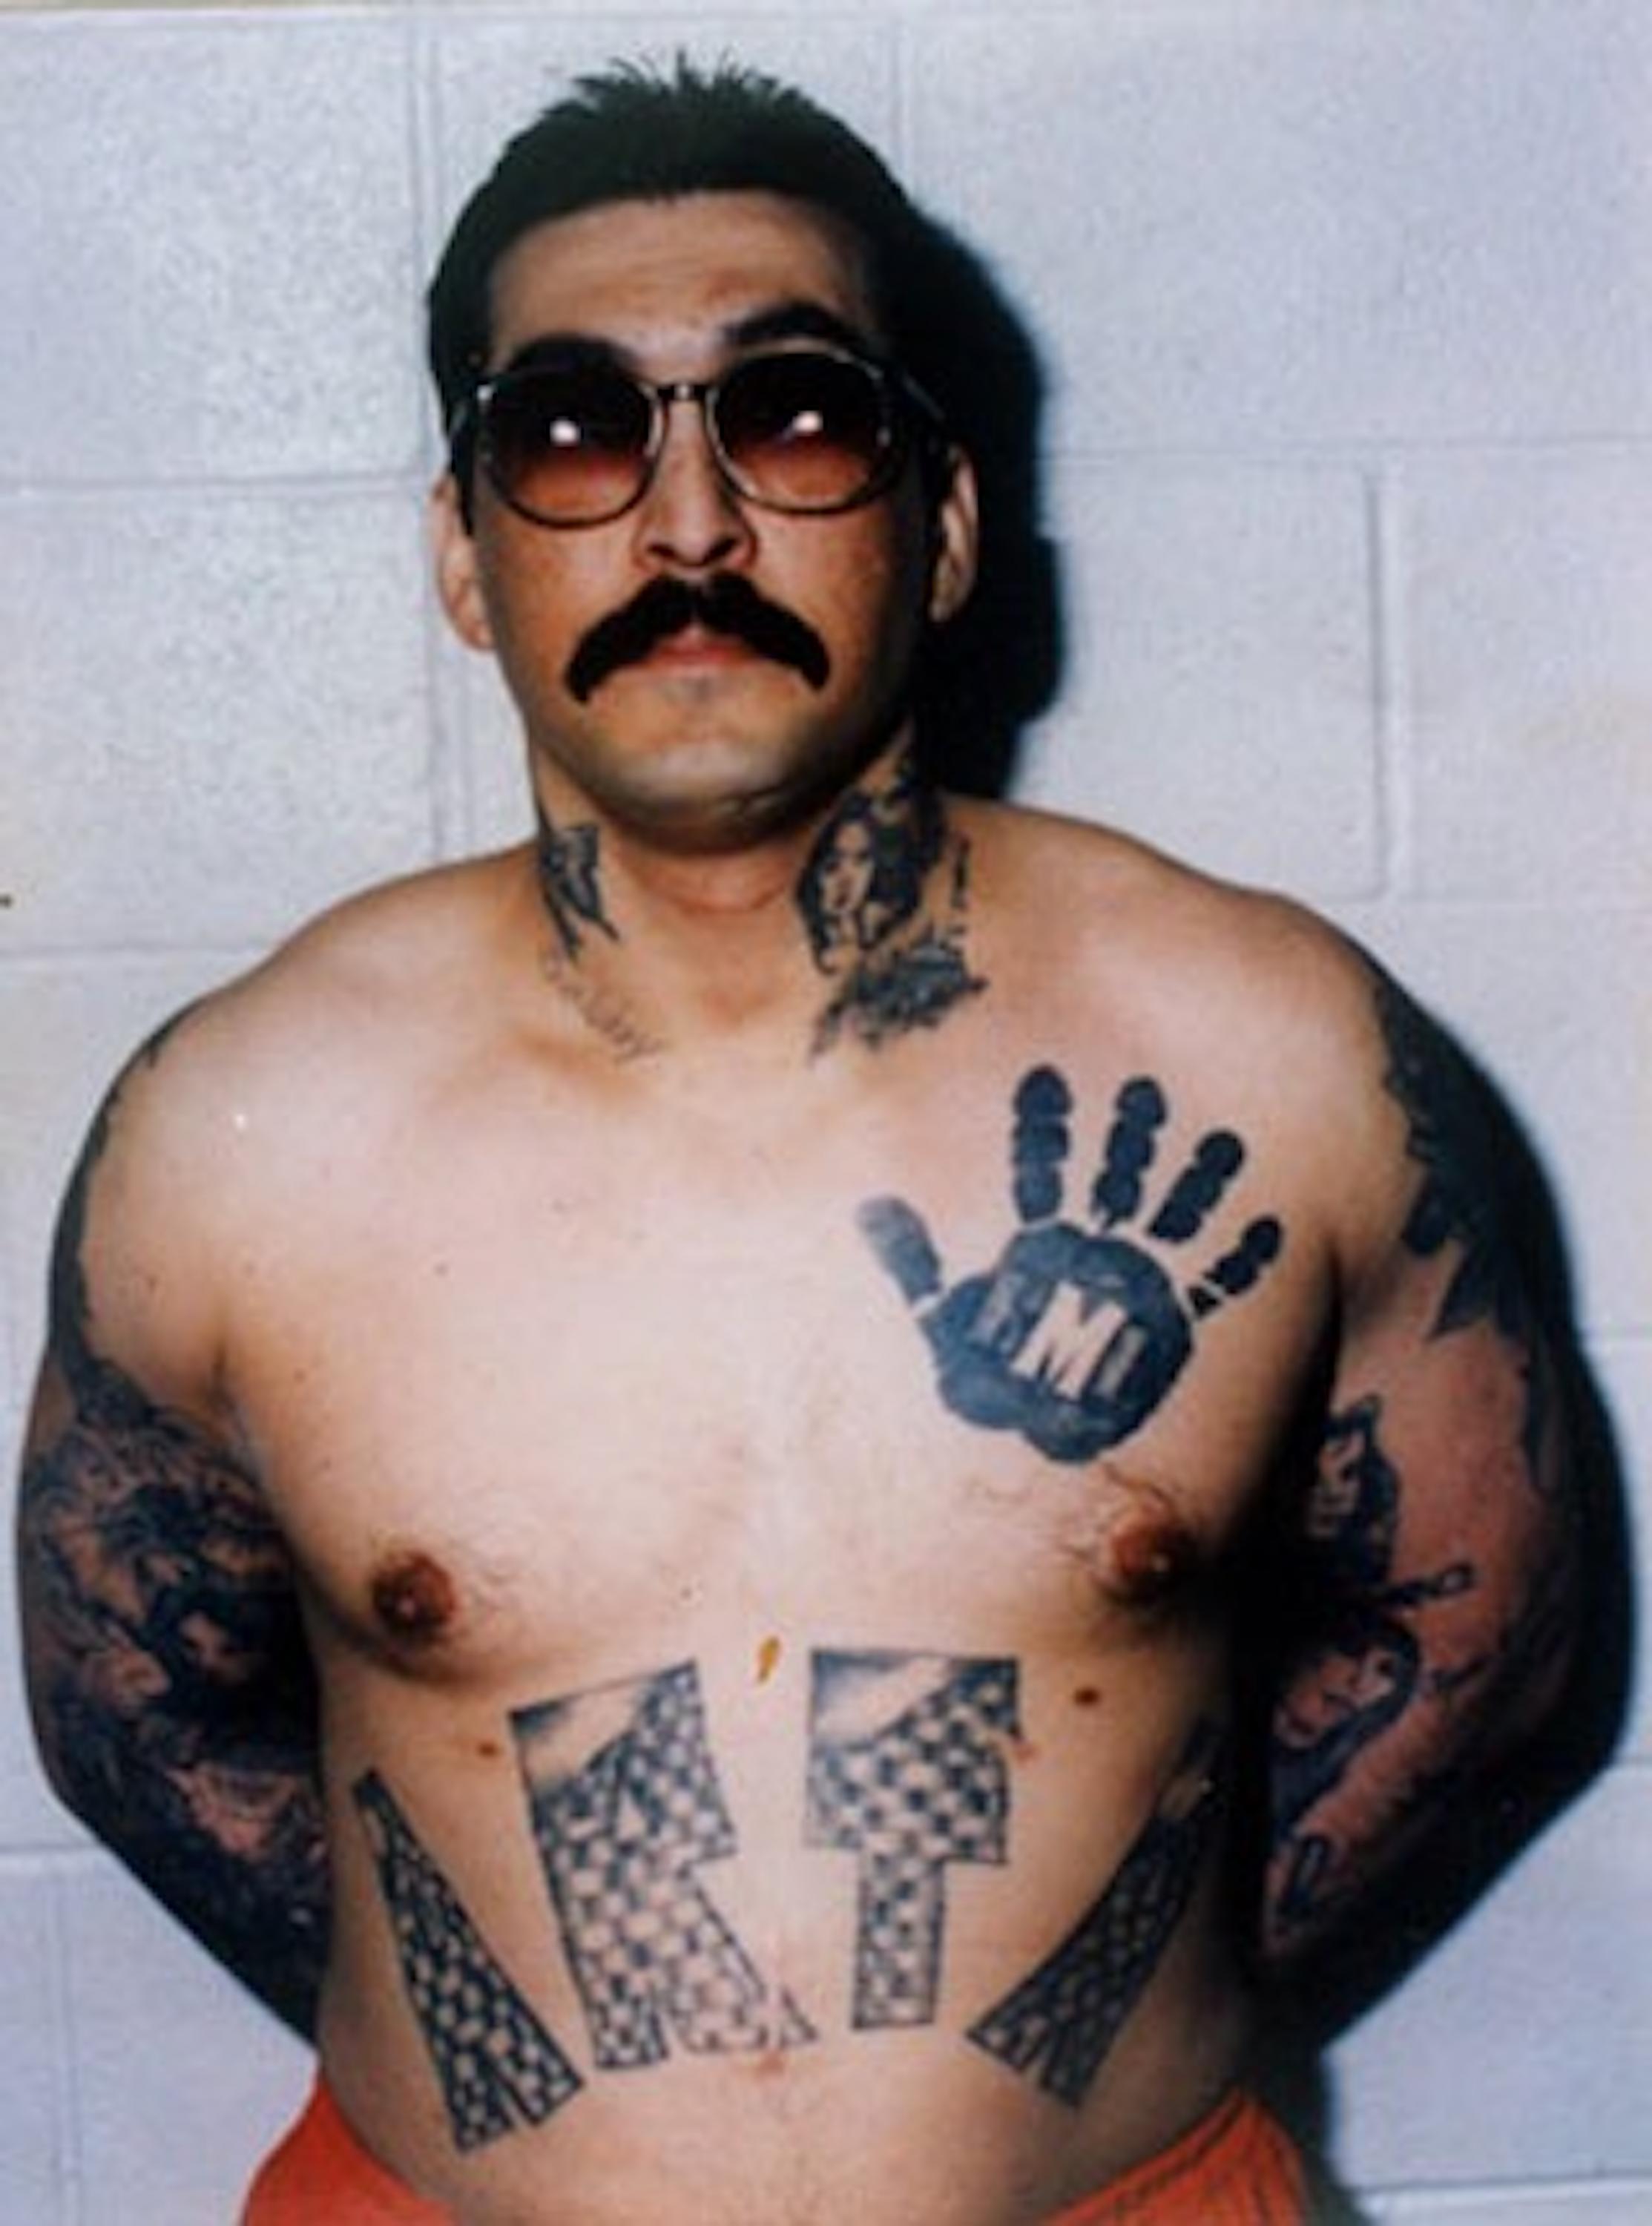 René “Boxer” Hénriquez, originally a member of the Artesia-13 gang, was chosen as a “carnal” of the Mexican Mafia in the 1980s. On his chest is a tattooed handprint reserved for those who achieve this status. Photo El Faro archive